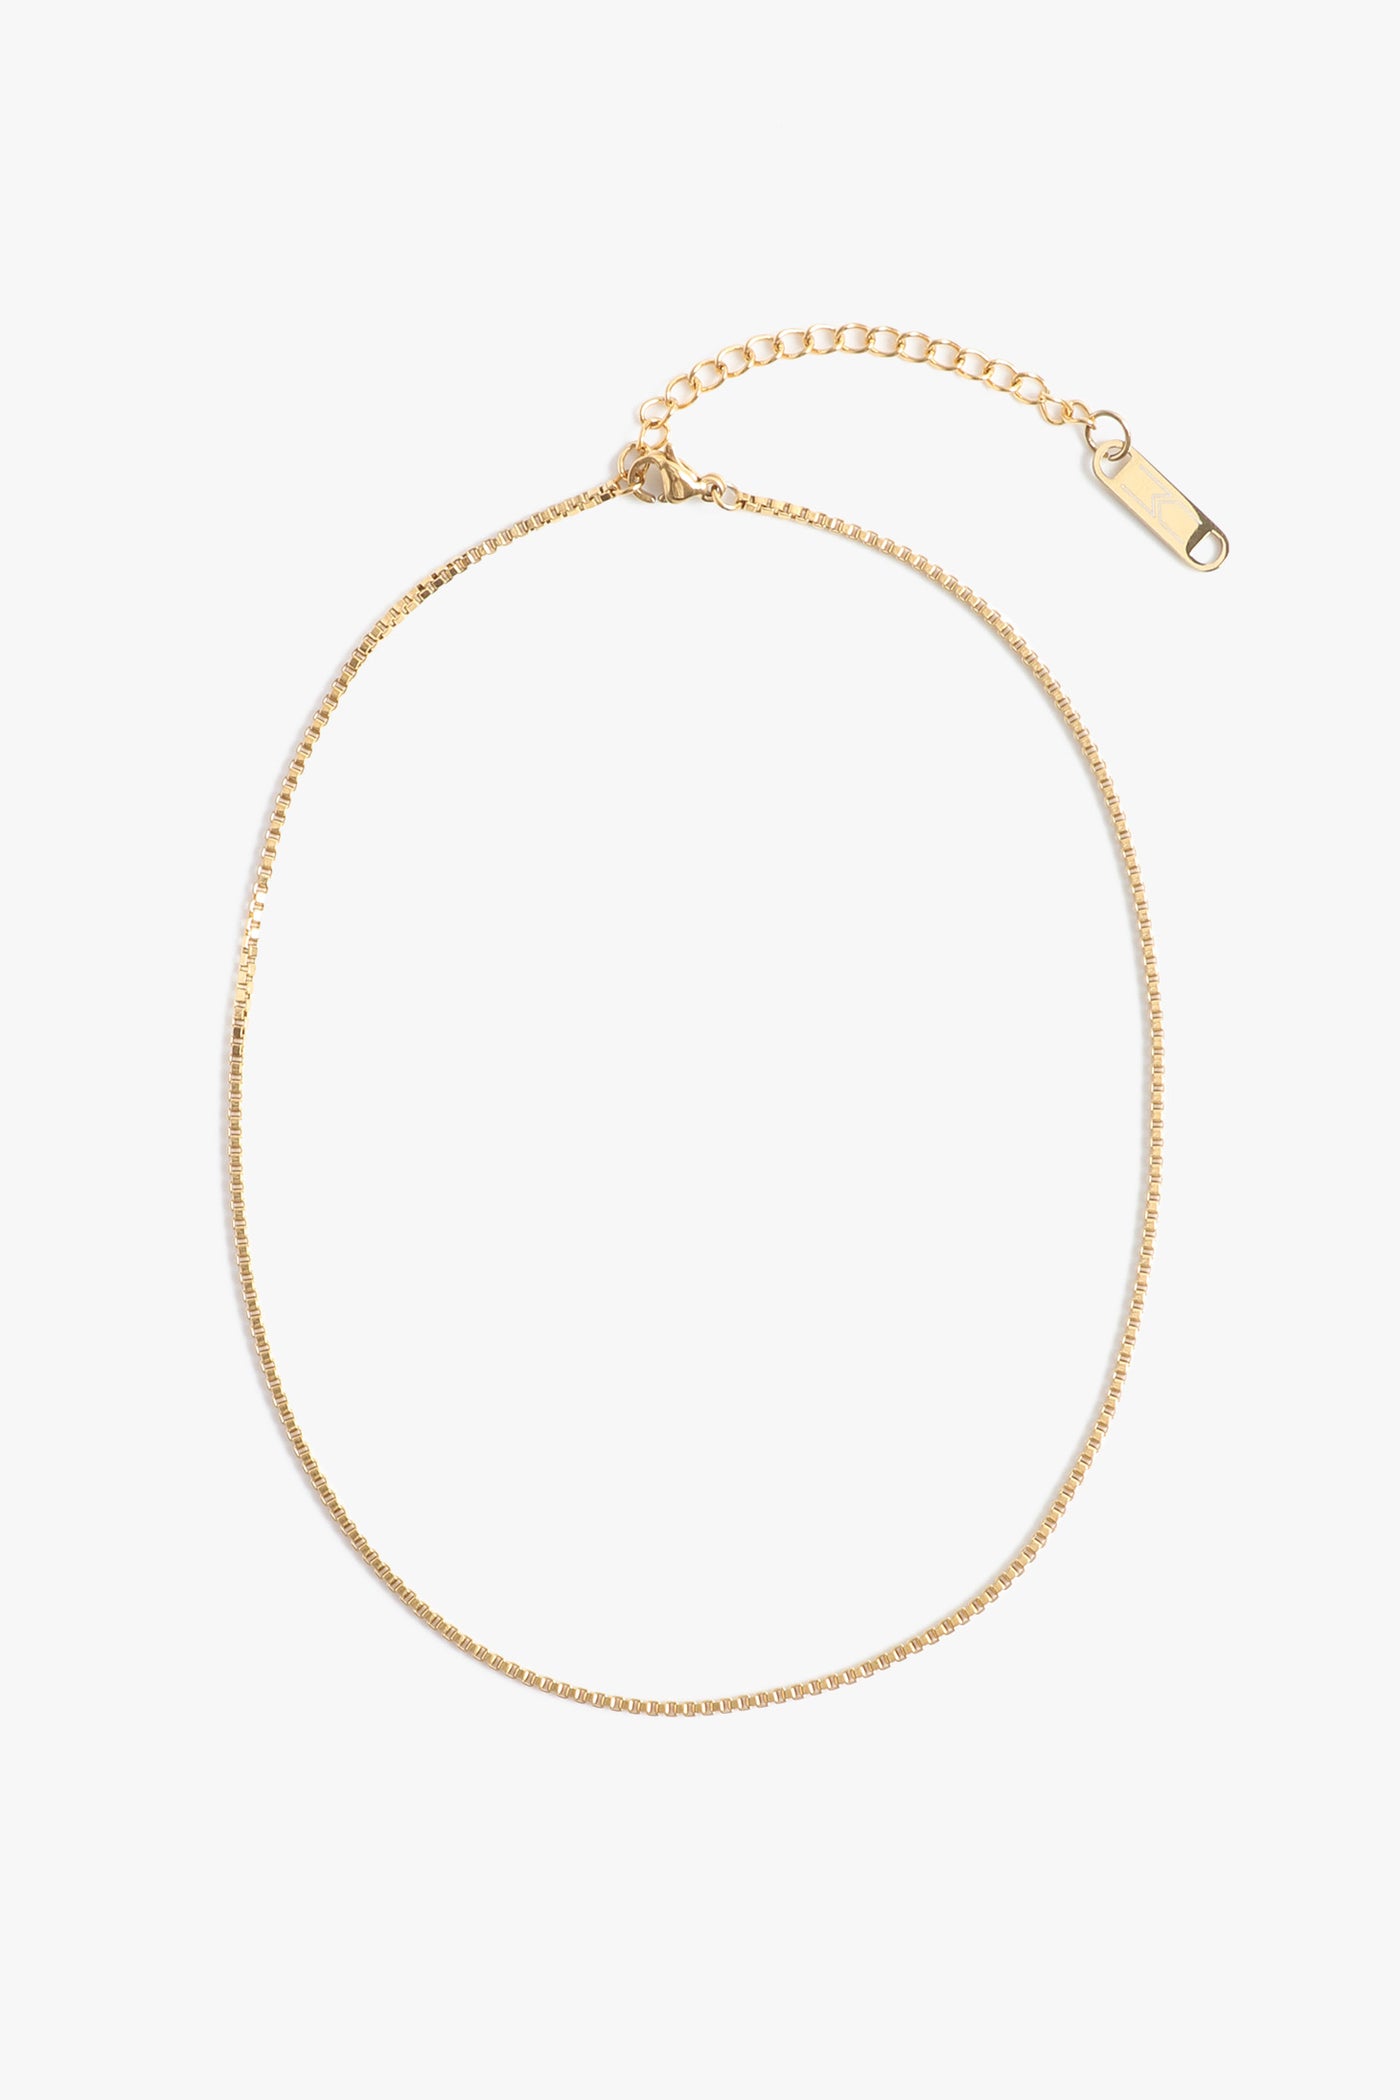 Marrin Costello Jewelry Nile Choker delicate dainty box link chain with lobster clasp closure and extender. Waterproof, sustainable, hypoallergenic. 14k gold plated stainless steel.